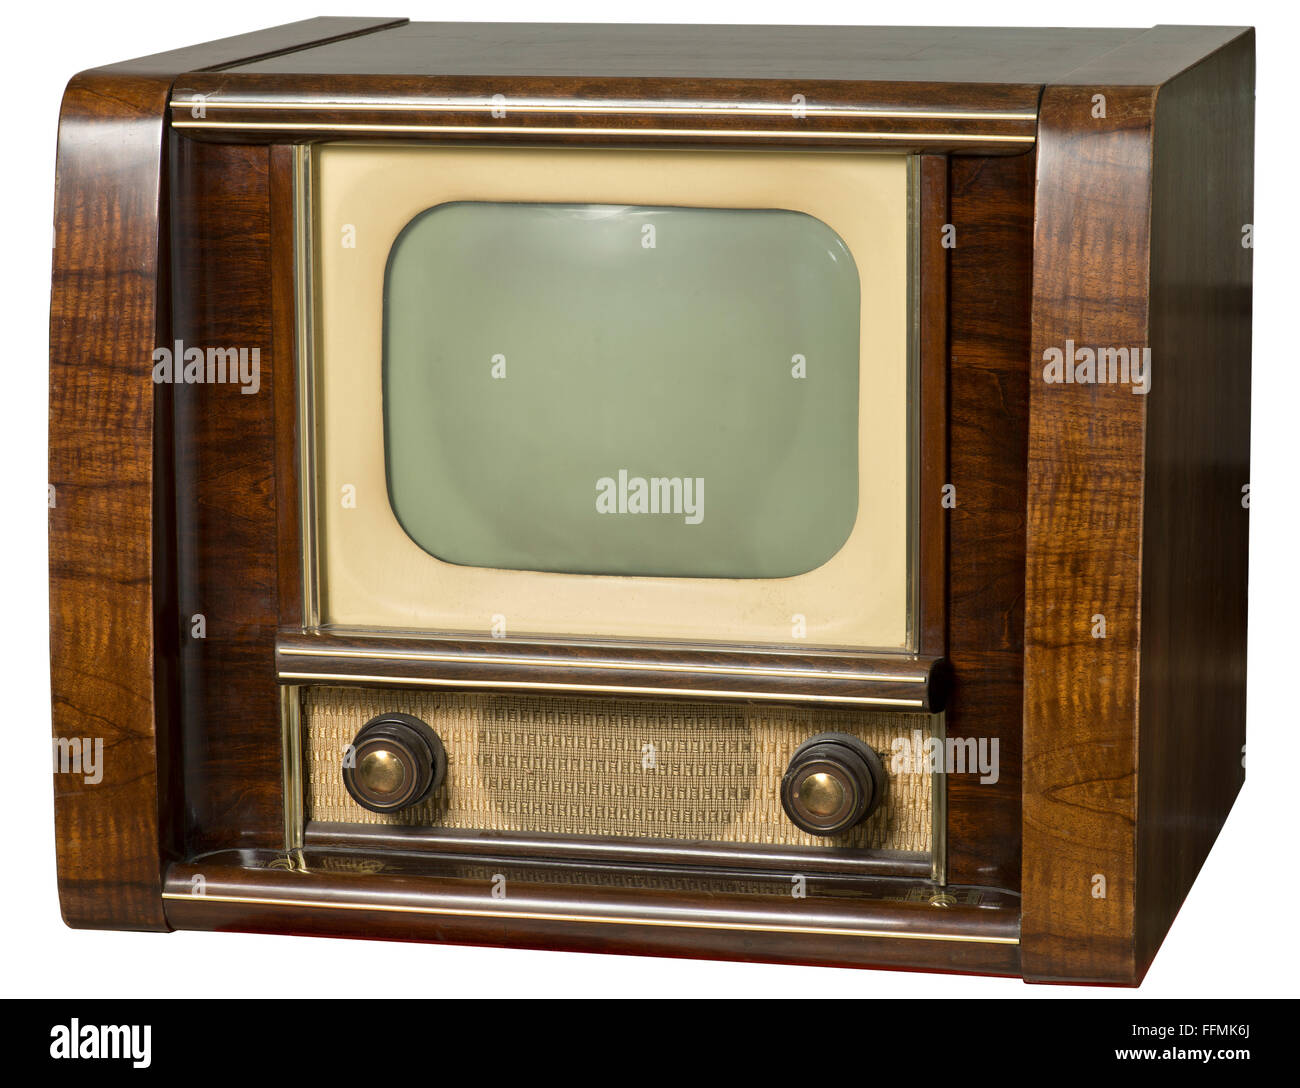 broadcast,television,television set,Blaupunkt,version F 2053,early German television set,original price: 1398.-,tabletop unit,with 36 cm screen size,black-white,chassis: exotic woods,one of the first postwar devices,Germany,1953,television,TV,TV device,screen,screens,telescreen,TV screen,telescreen,TV screen,frontal,Made in Germany,economic miracle,economic miracles,TV history,technology,engineering,technologies,history of technology,stills,1950s,50s,clipping,cut out,cut-out,cut-outs,TV set,television set,broadcast recei,Additional-Rights-Clearences-Not Available Stock Photo